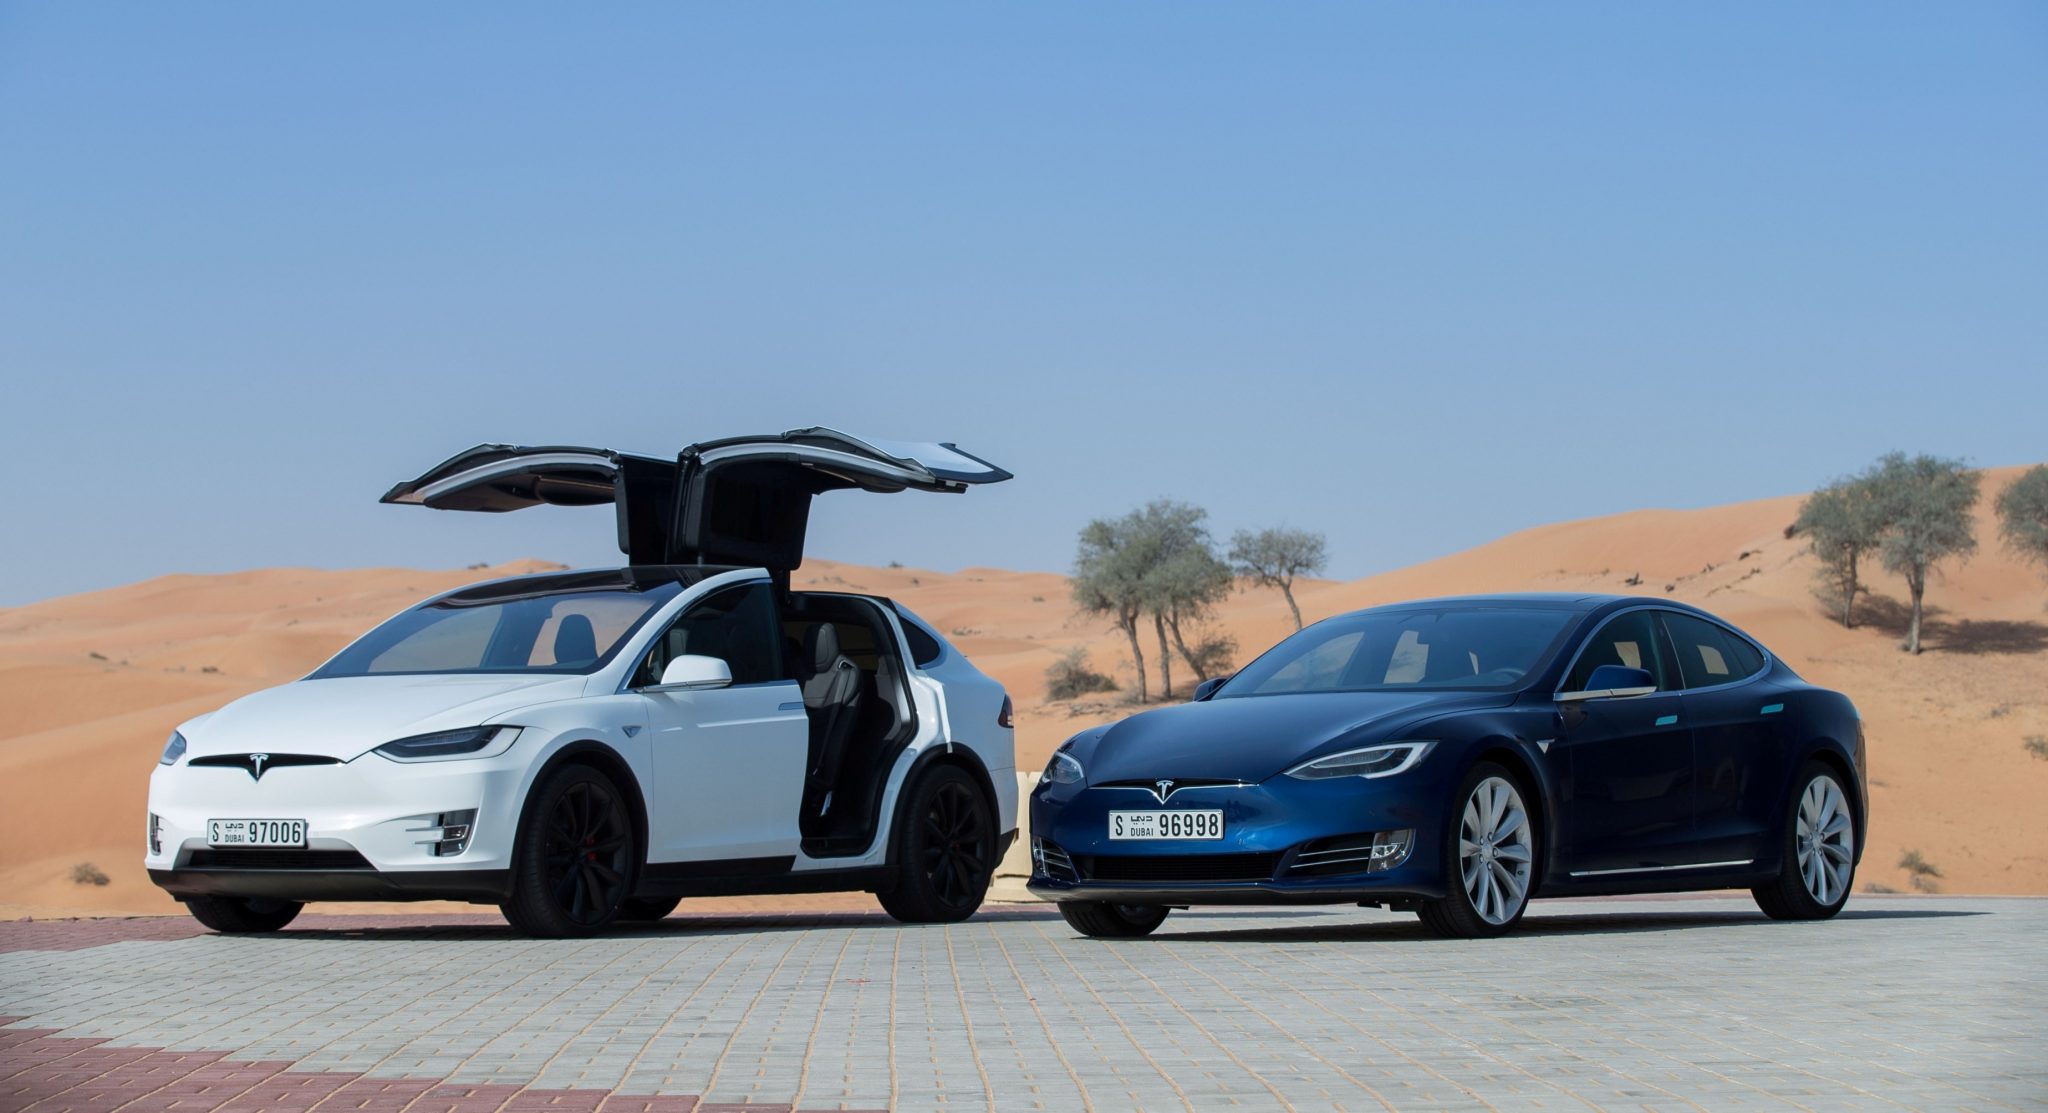 Survey Reveals Awareness of Electric cars is higher in the UAE than Awareness of Autonomous and Connected Cars